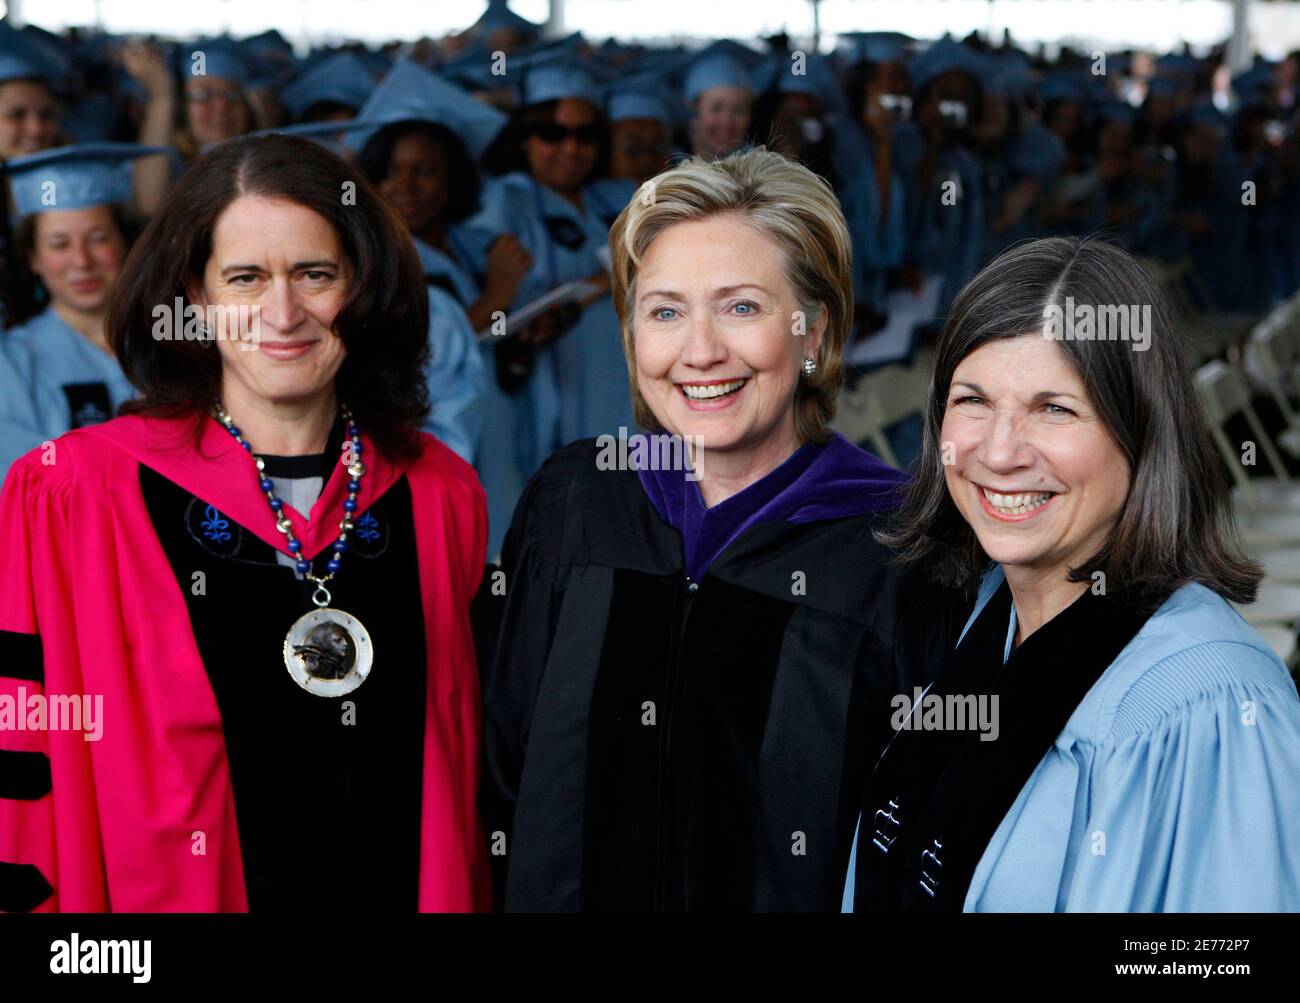 U.S. Secretary of State Hillary Clinton (C) is flanked by Debora Spar, President of Barnard College, and Anna Quindlen, Chair of the Board of Trustees (R), before delivering the commencement address, in New York, May 18, 2009.  REUTERS/Chip East (UNITED STATES EDUCATION POLITICS) Stock Photo